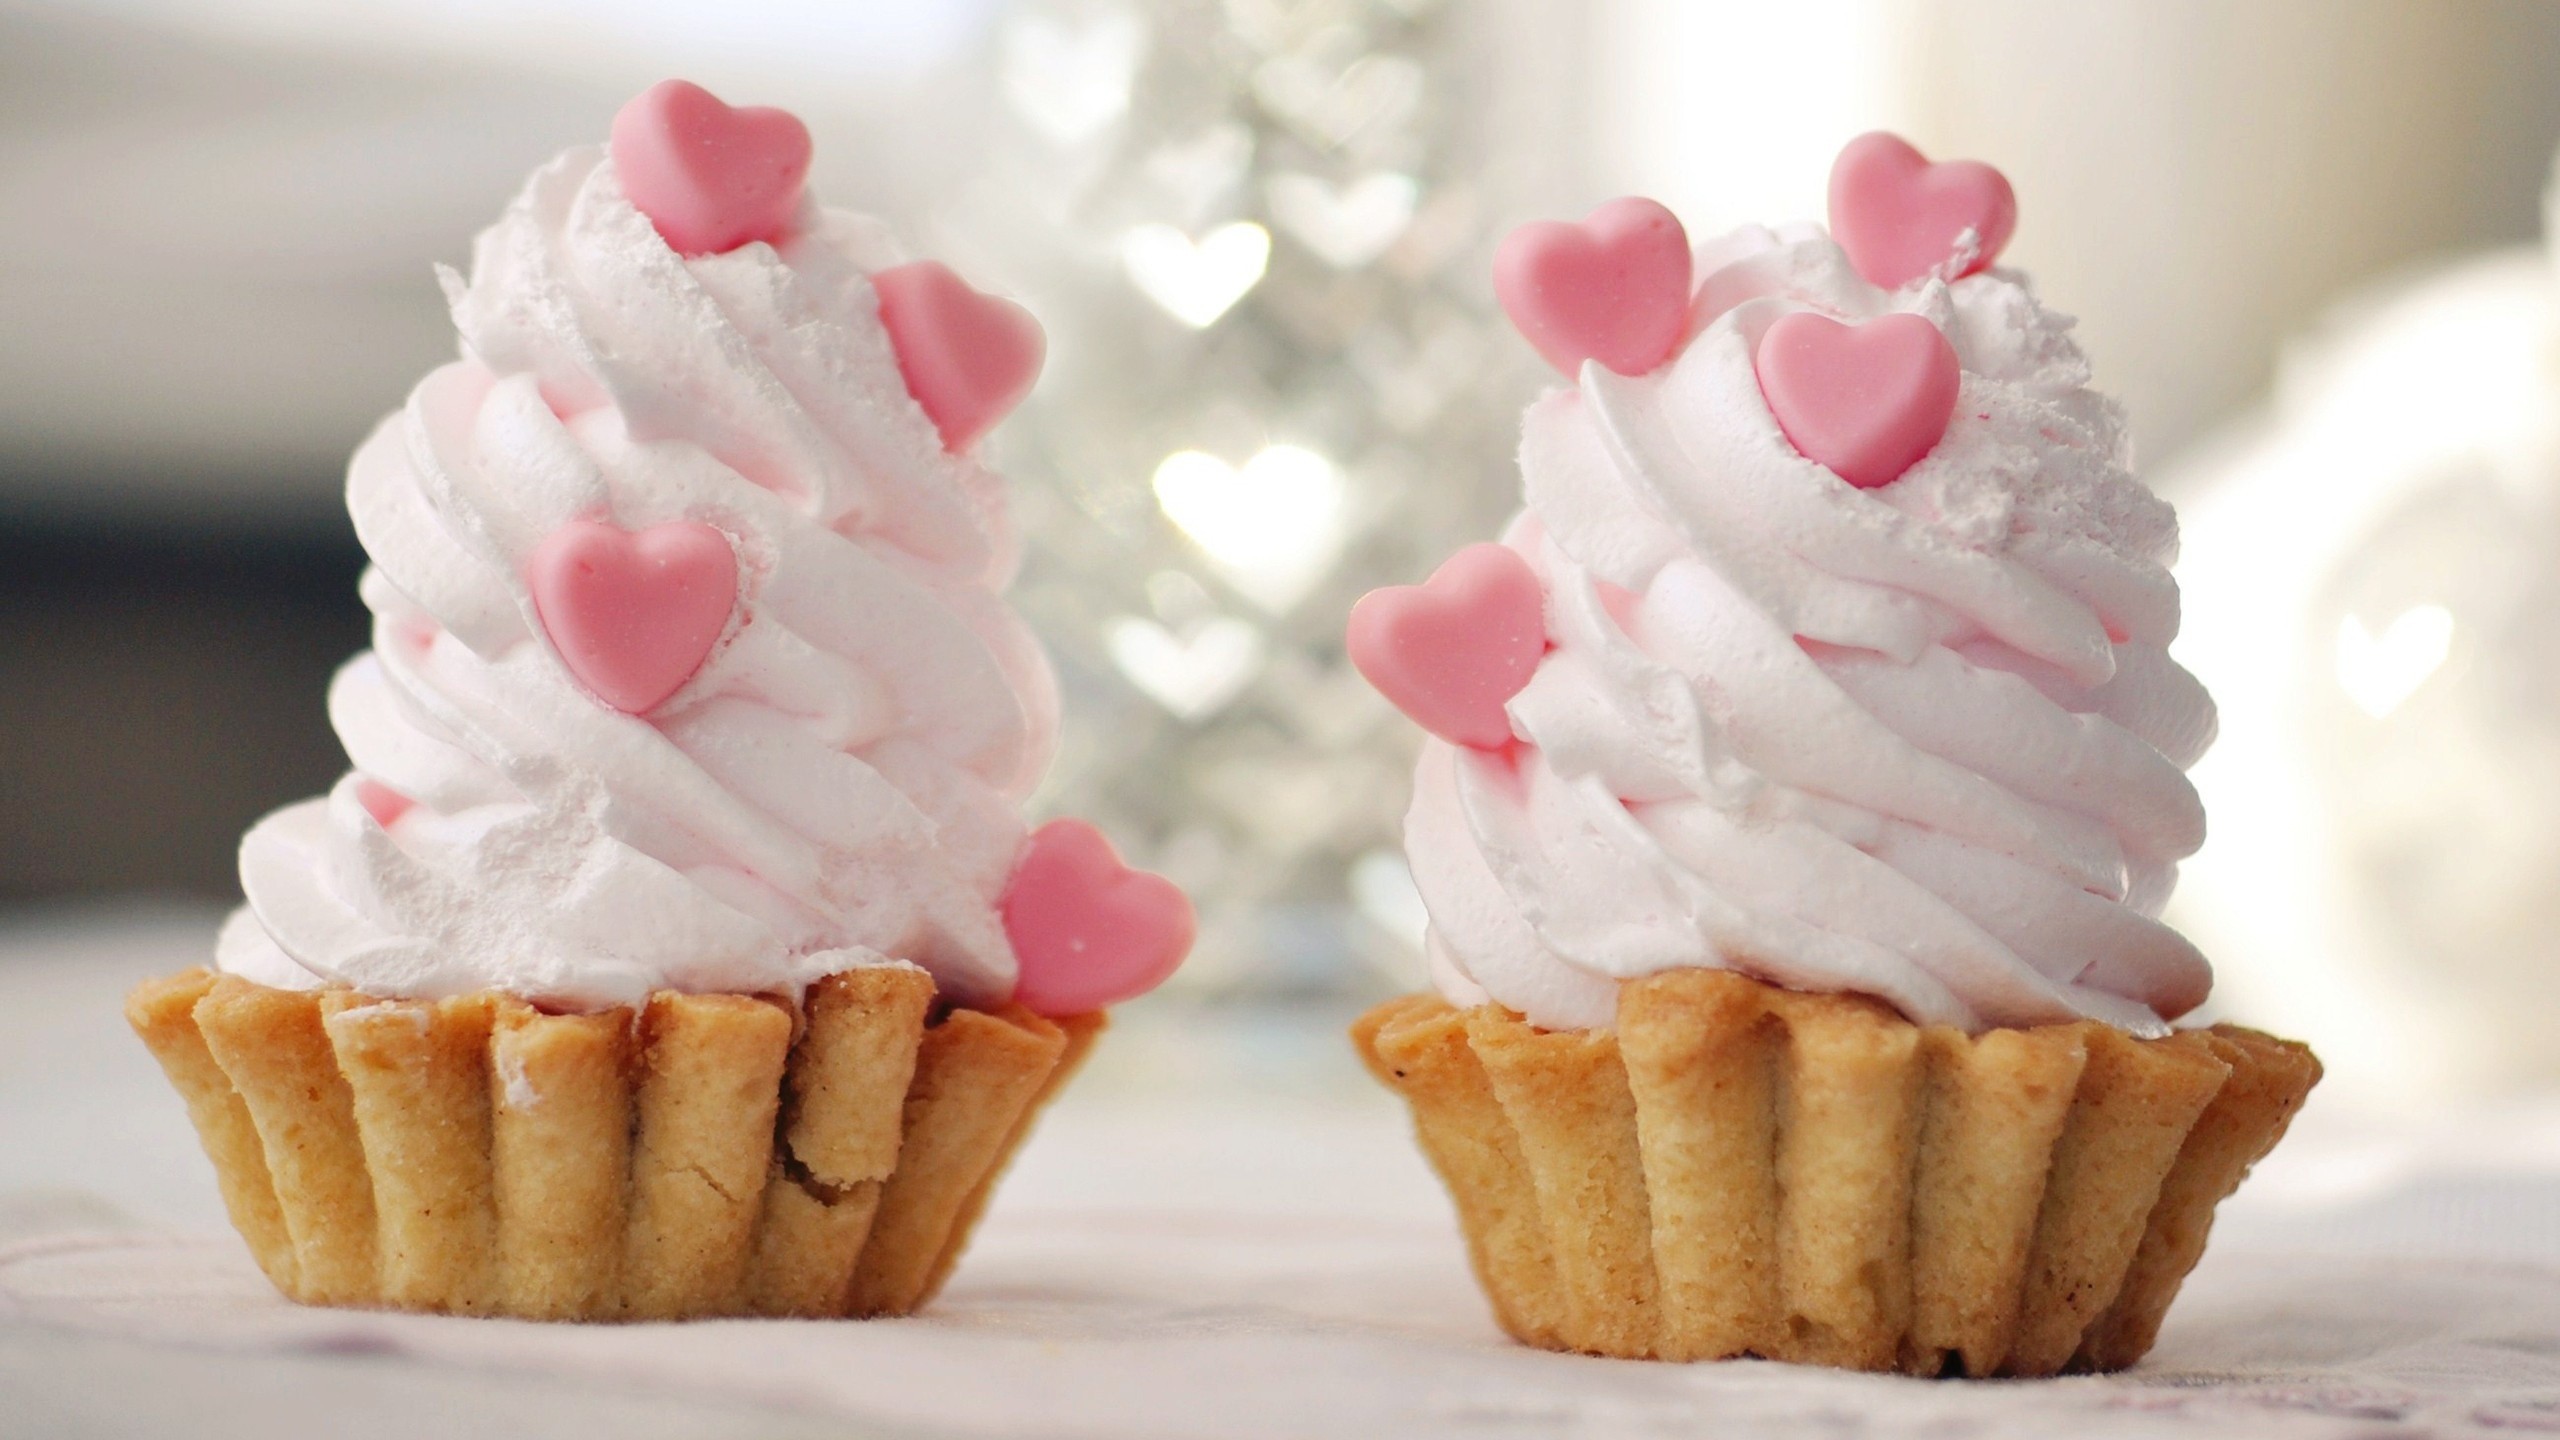 Download Cute Cupcakes Wallpaper 650 px High Resolution .